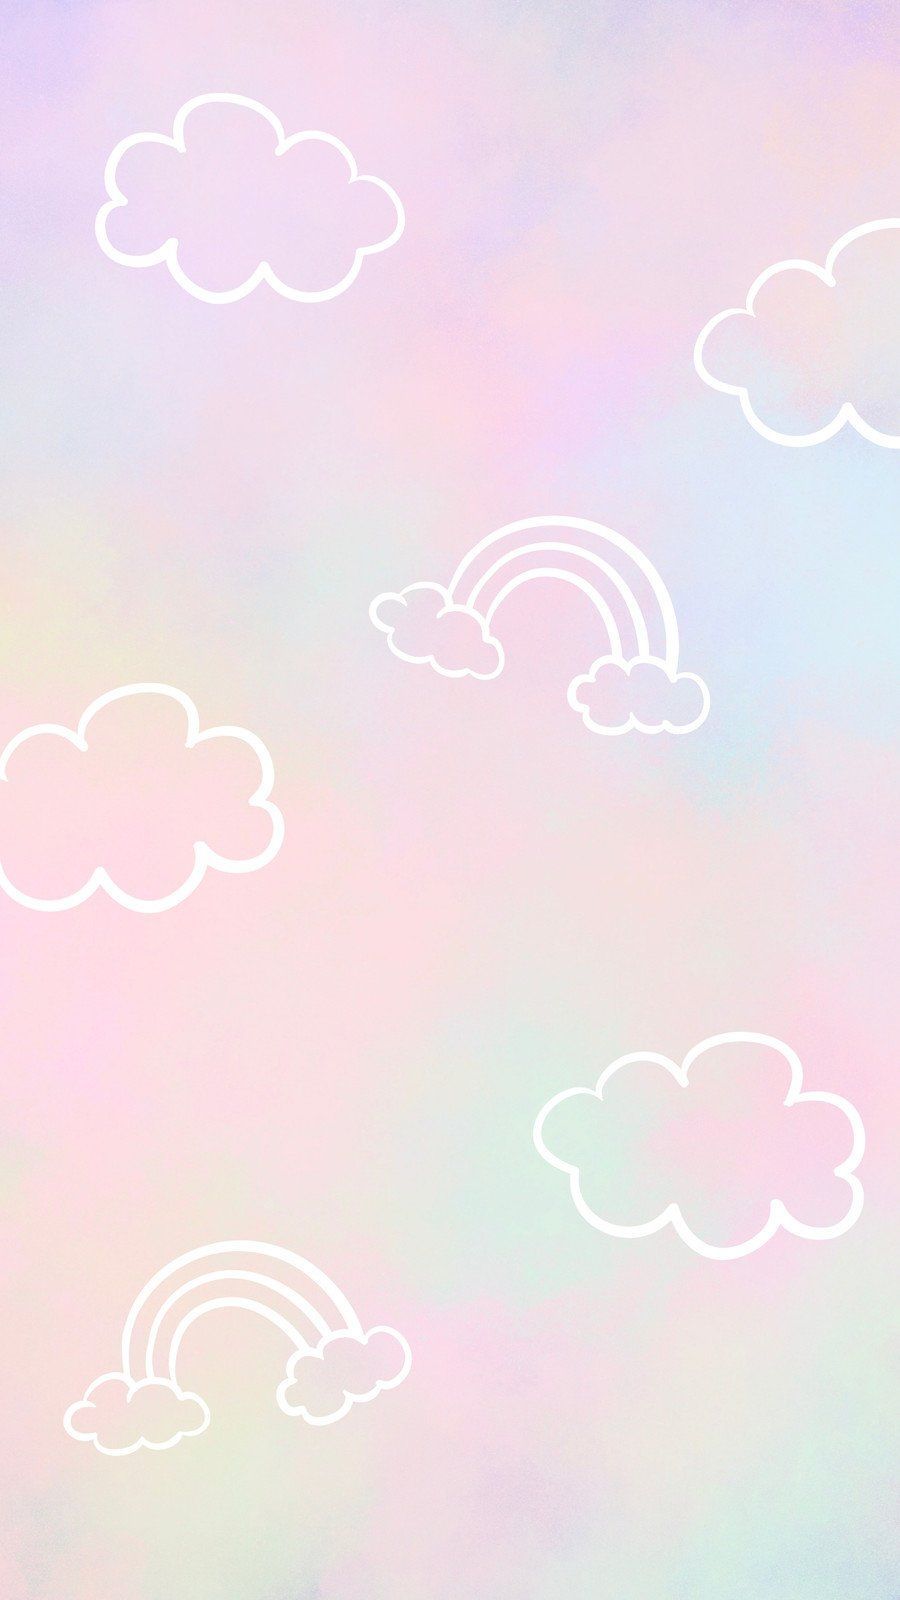 Aesthetic wallpaper with pastel rainbow and clouds - Pastel rainbow, pastel purple